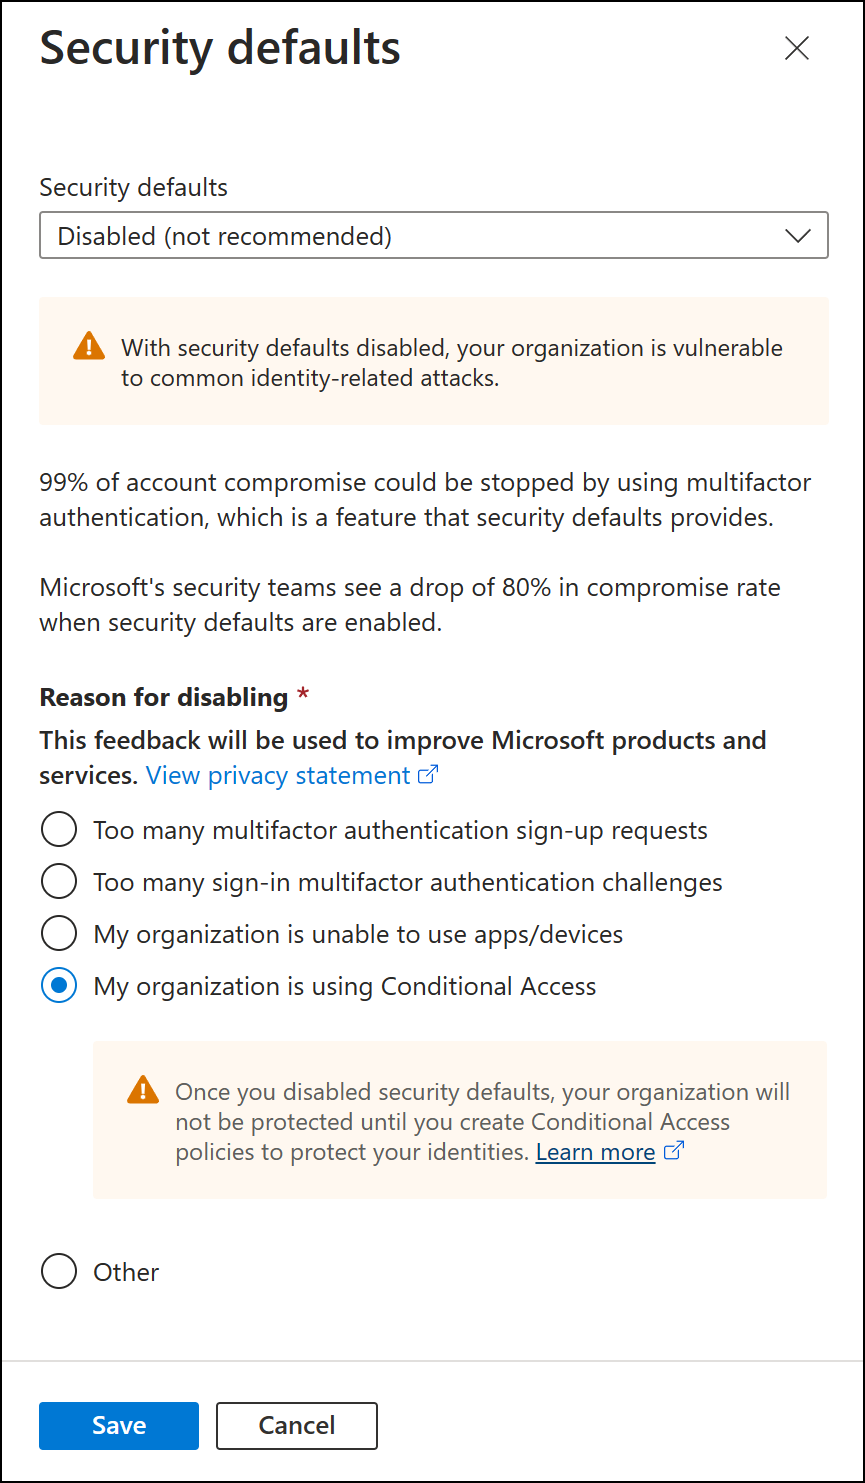 Warning message that you can have security defaults or Conditional Access not both